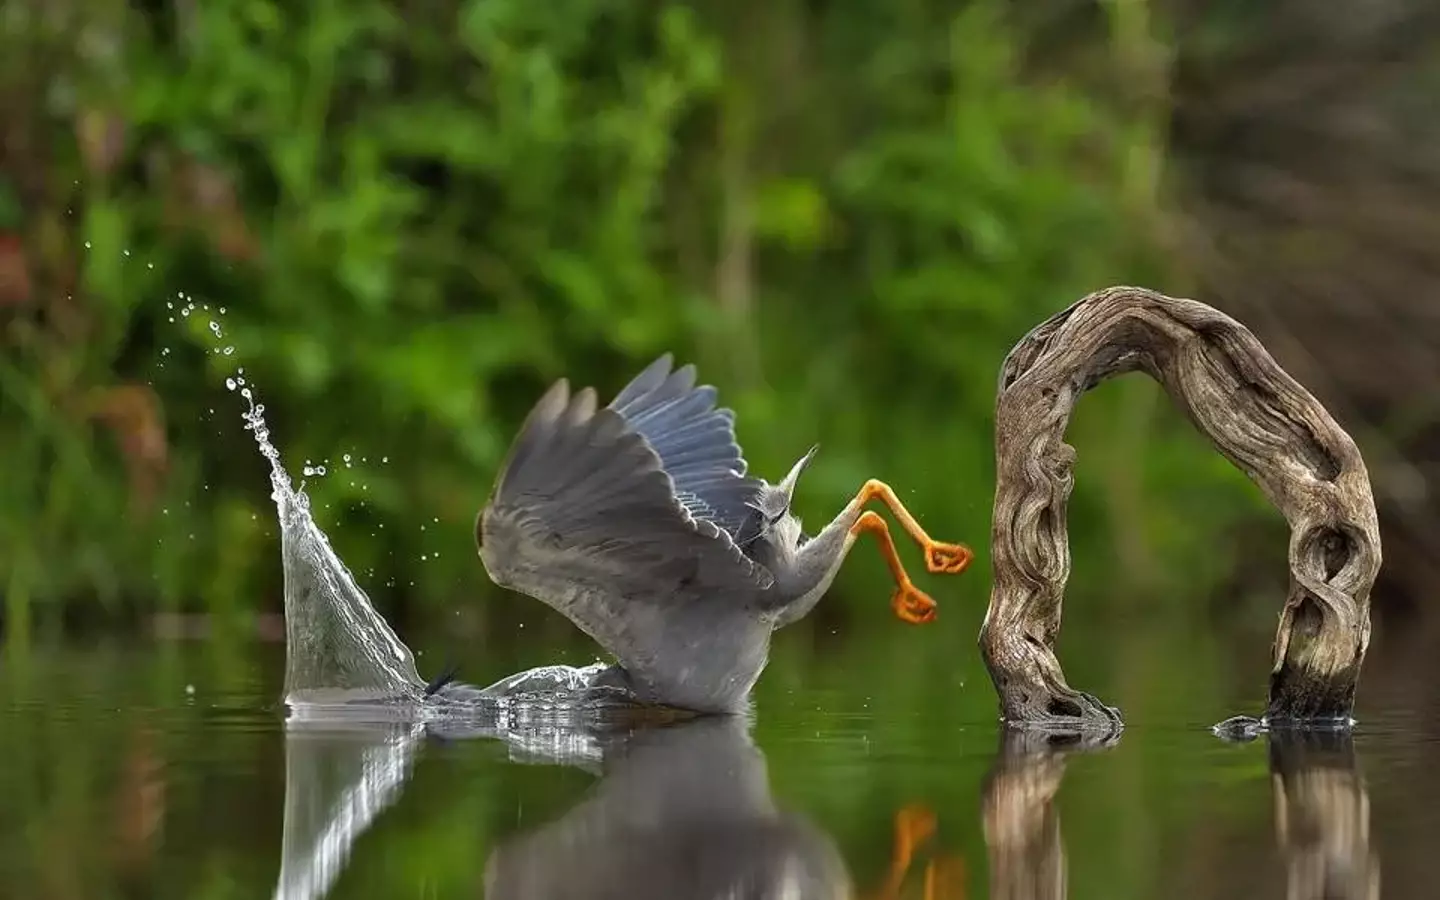 A heron face plants into the water.